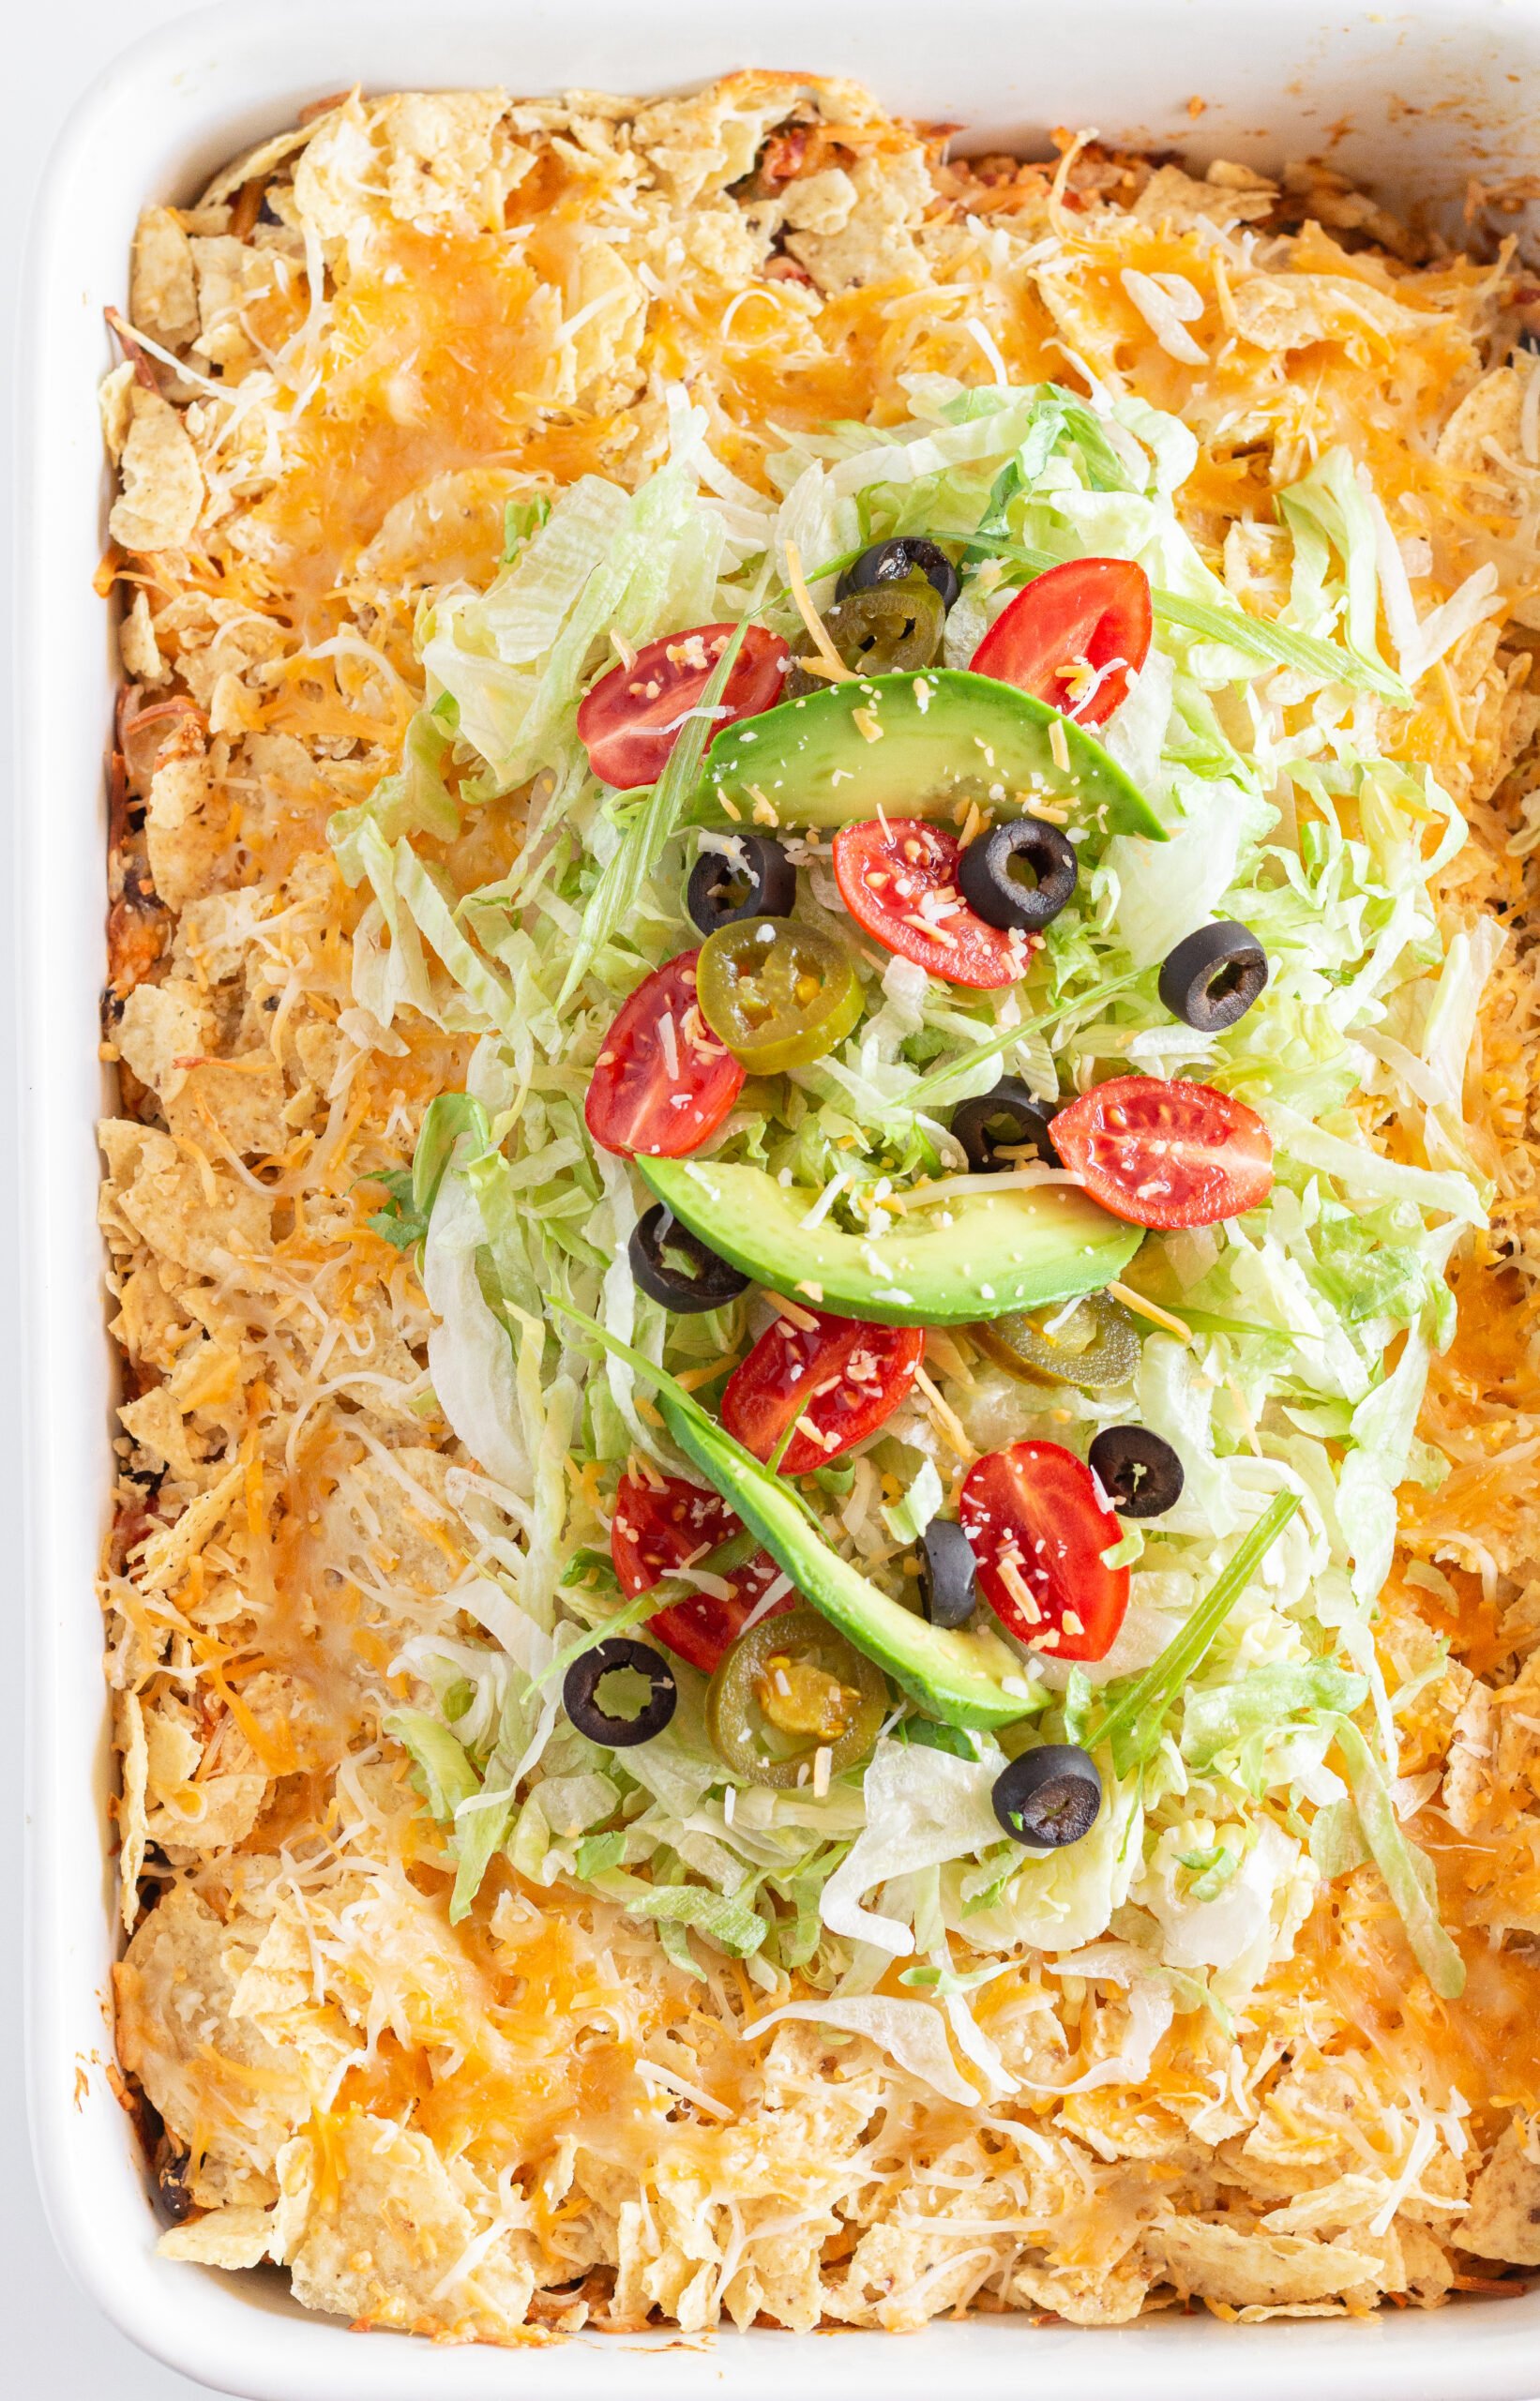 Easy Chicken Taco Casserole, by Top US food blog Practically Homemade